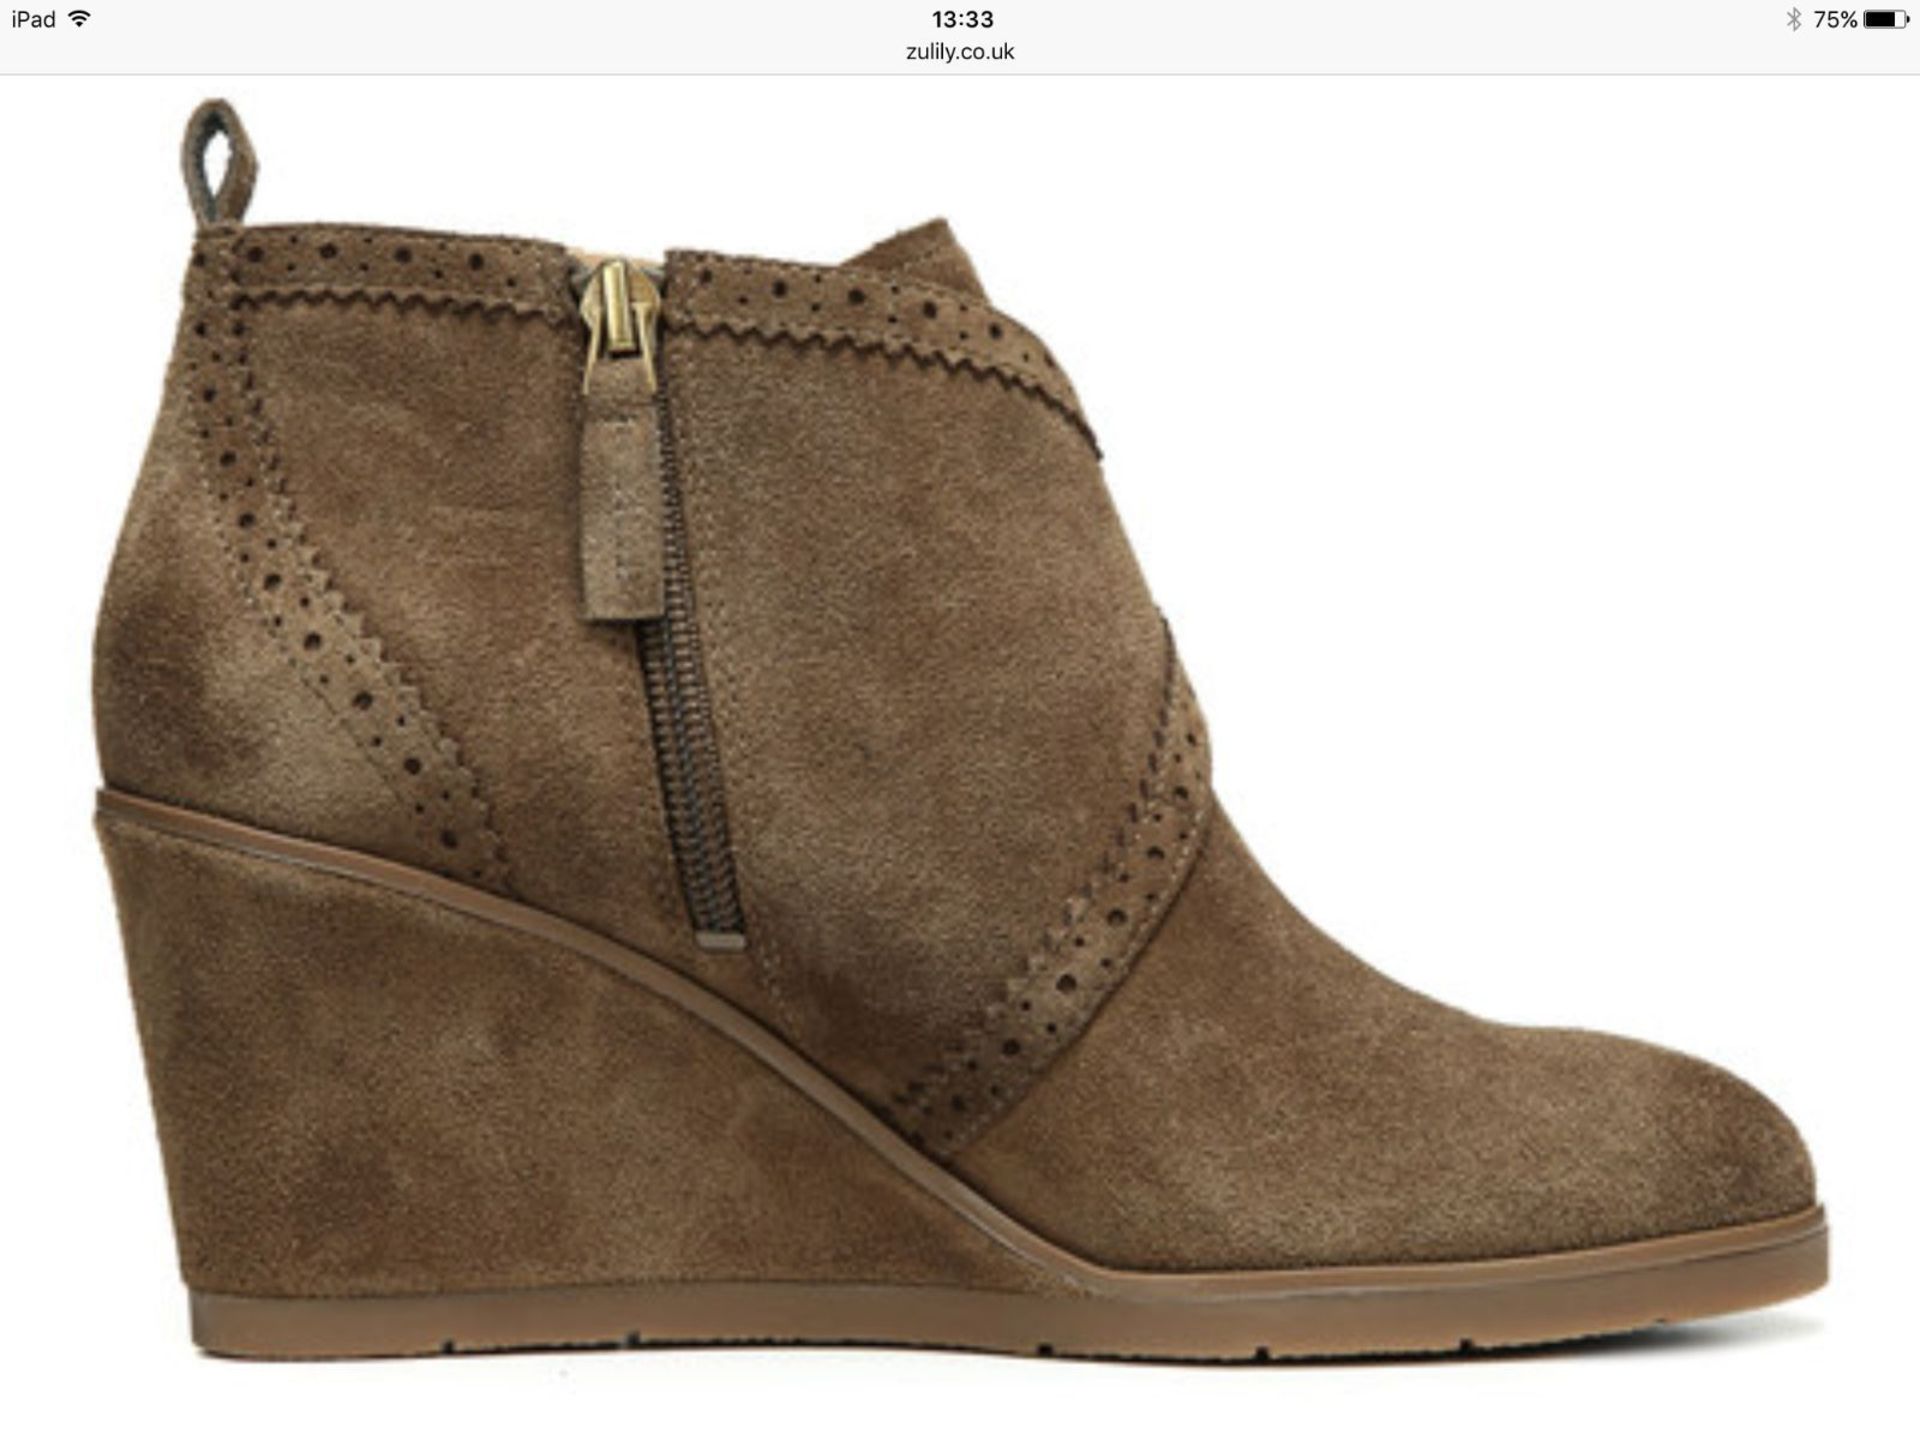 Franco Sarto Desert Khaki Arielle Suede Wedge Bootie, Size UK 6, RRP £151.99 (New with box) - Image 4 of 8